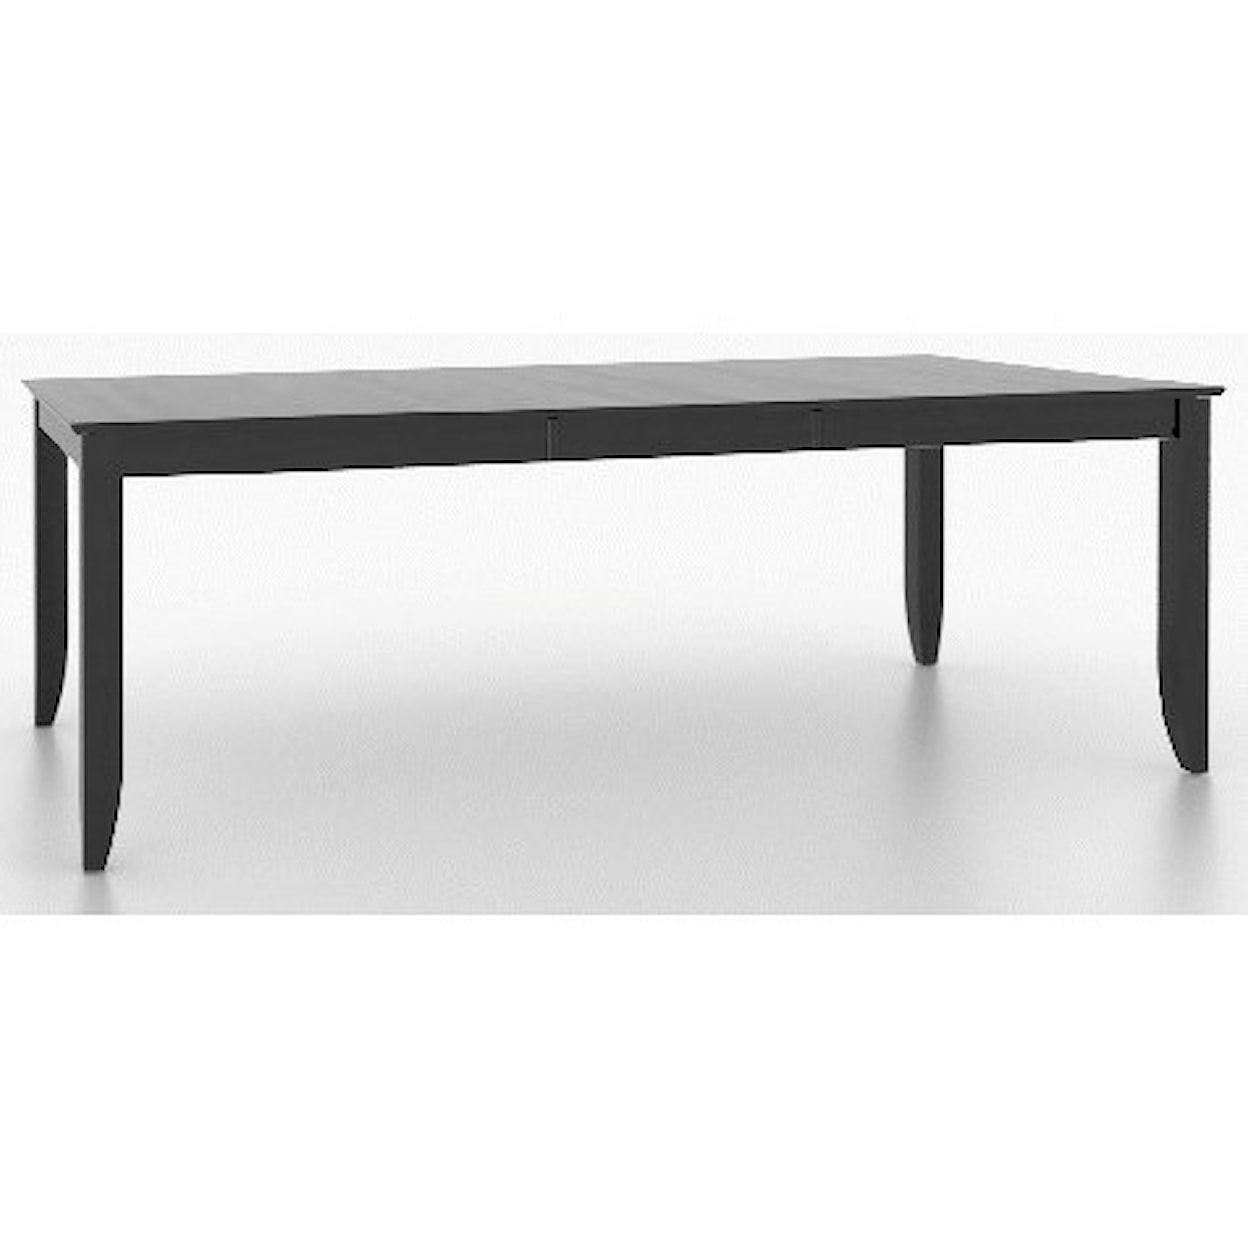 Canadel Canadel Customizable Rectangular Dining Table